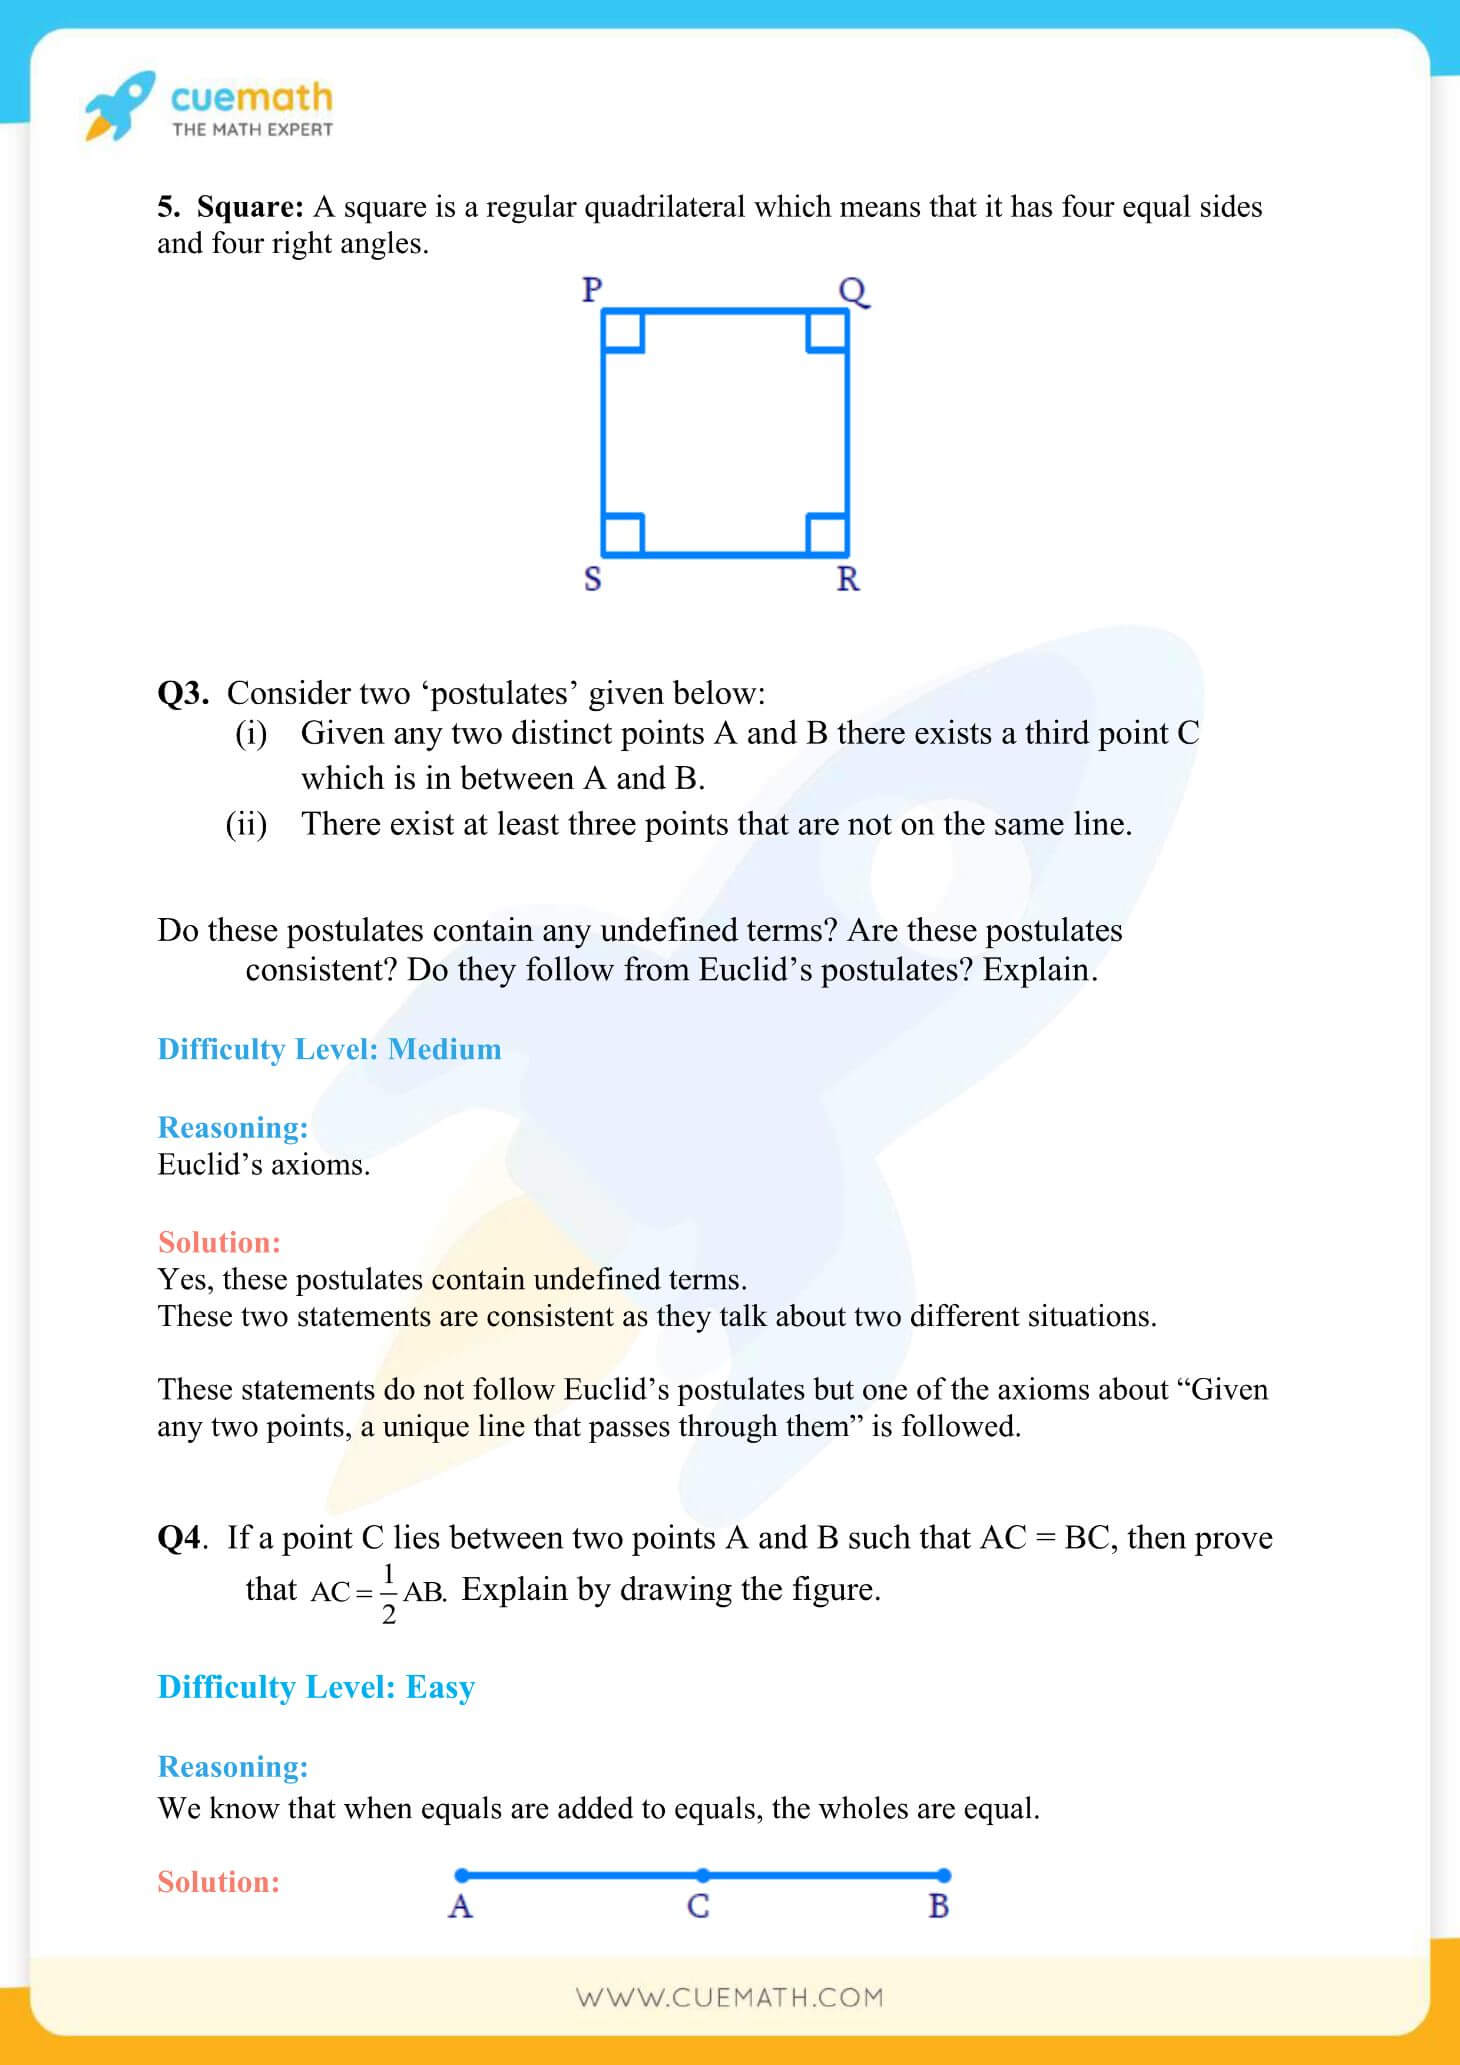 NCERT Solutions Class 9 Math Chapter 5 Exercise 5.1 5